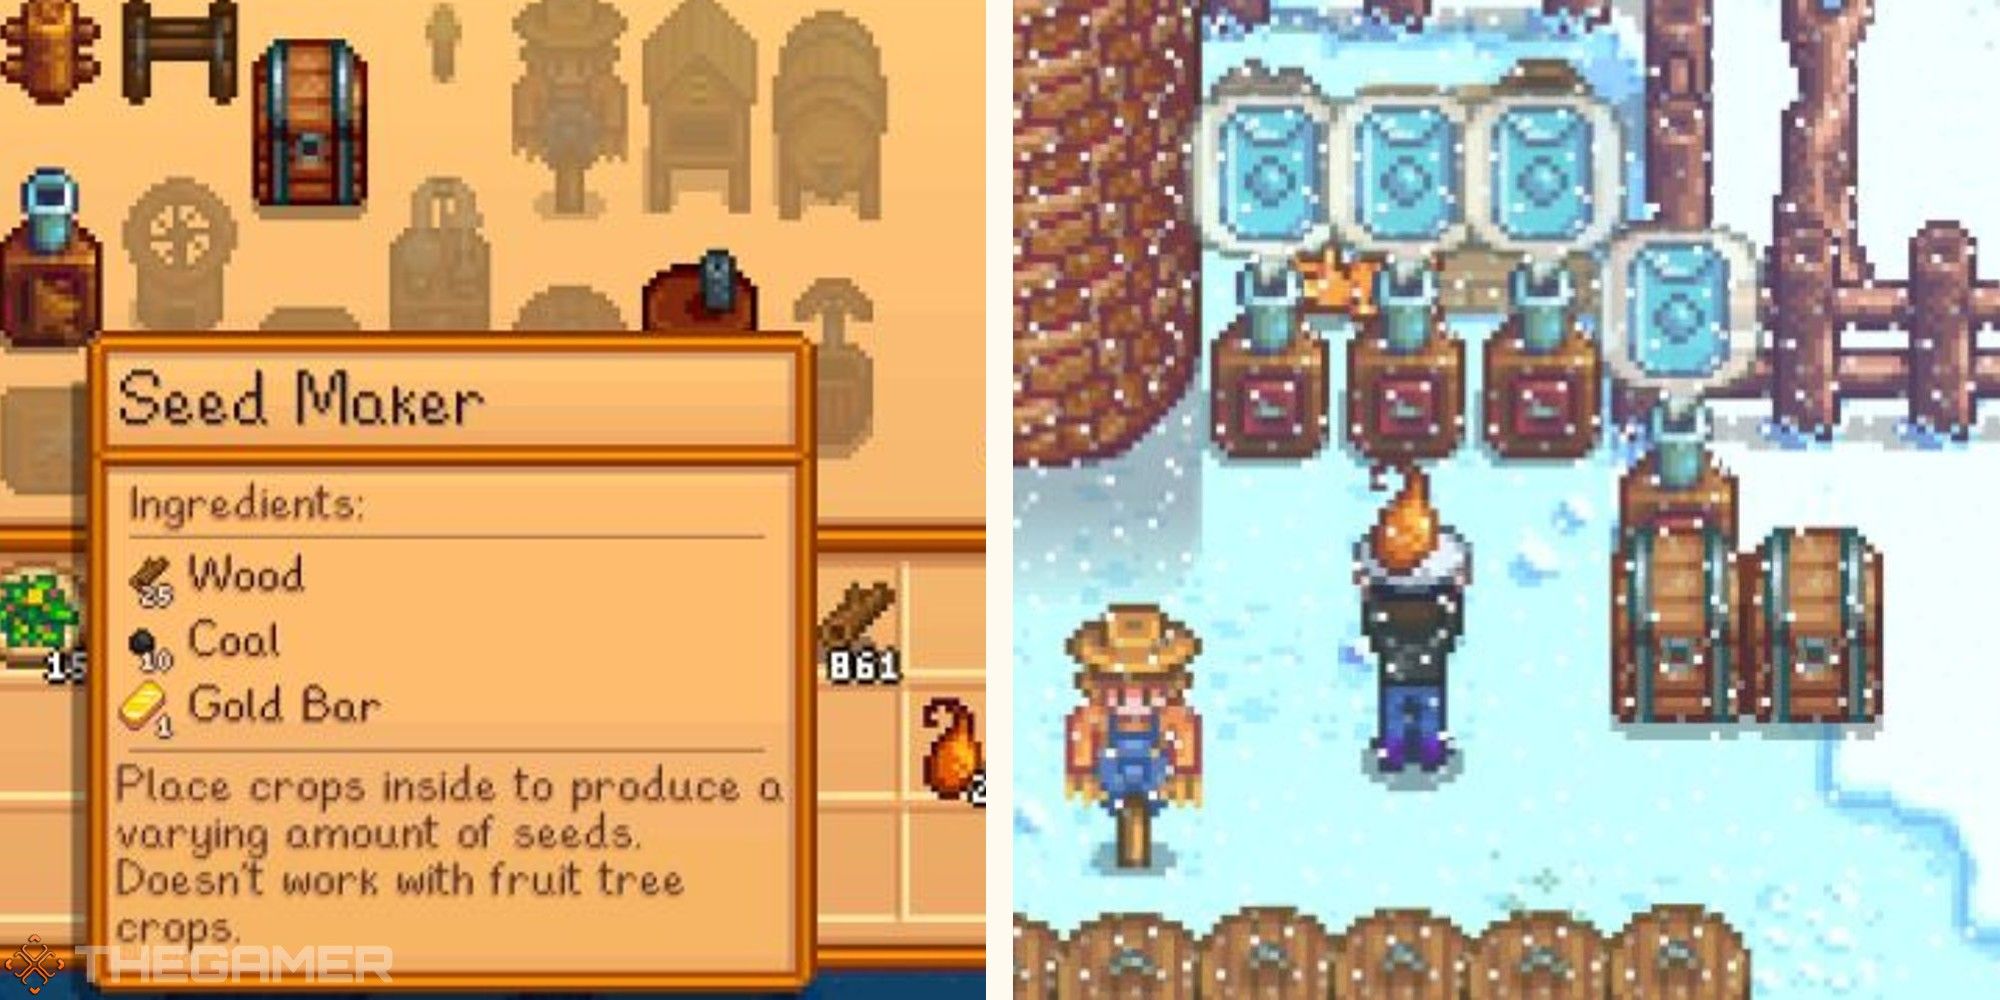 image of seed maker recipe next to image of player standing near seed makers with ancient seeds